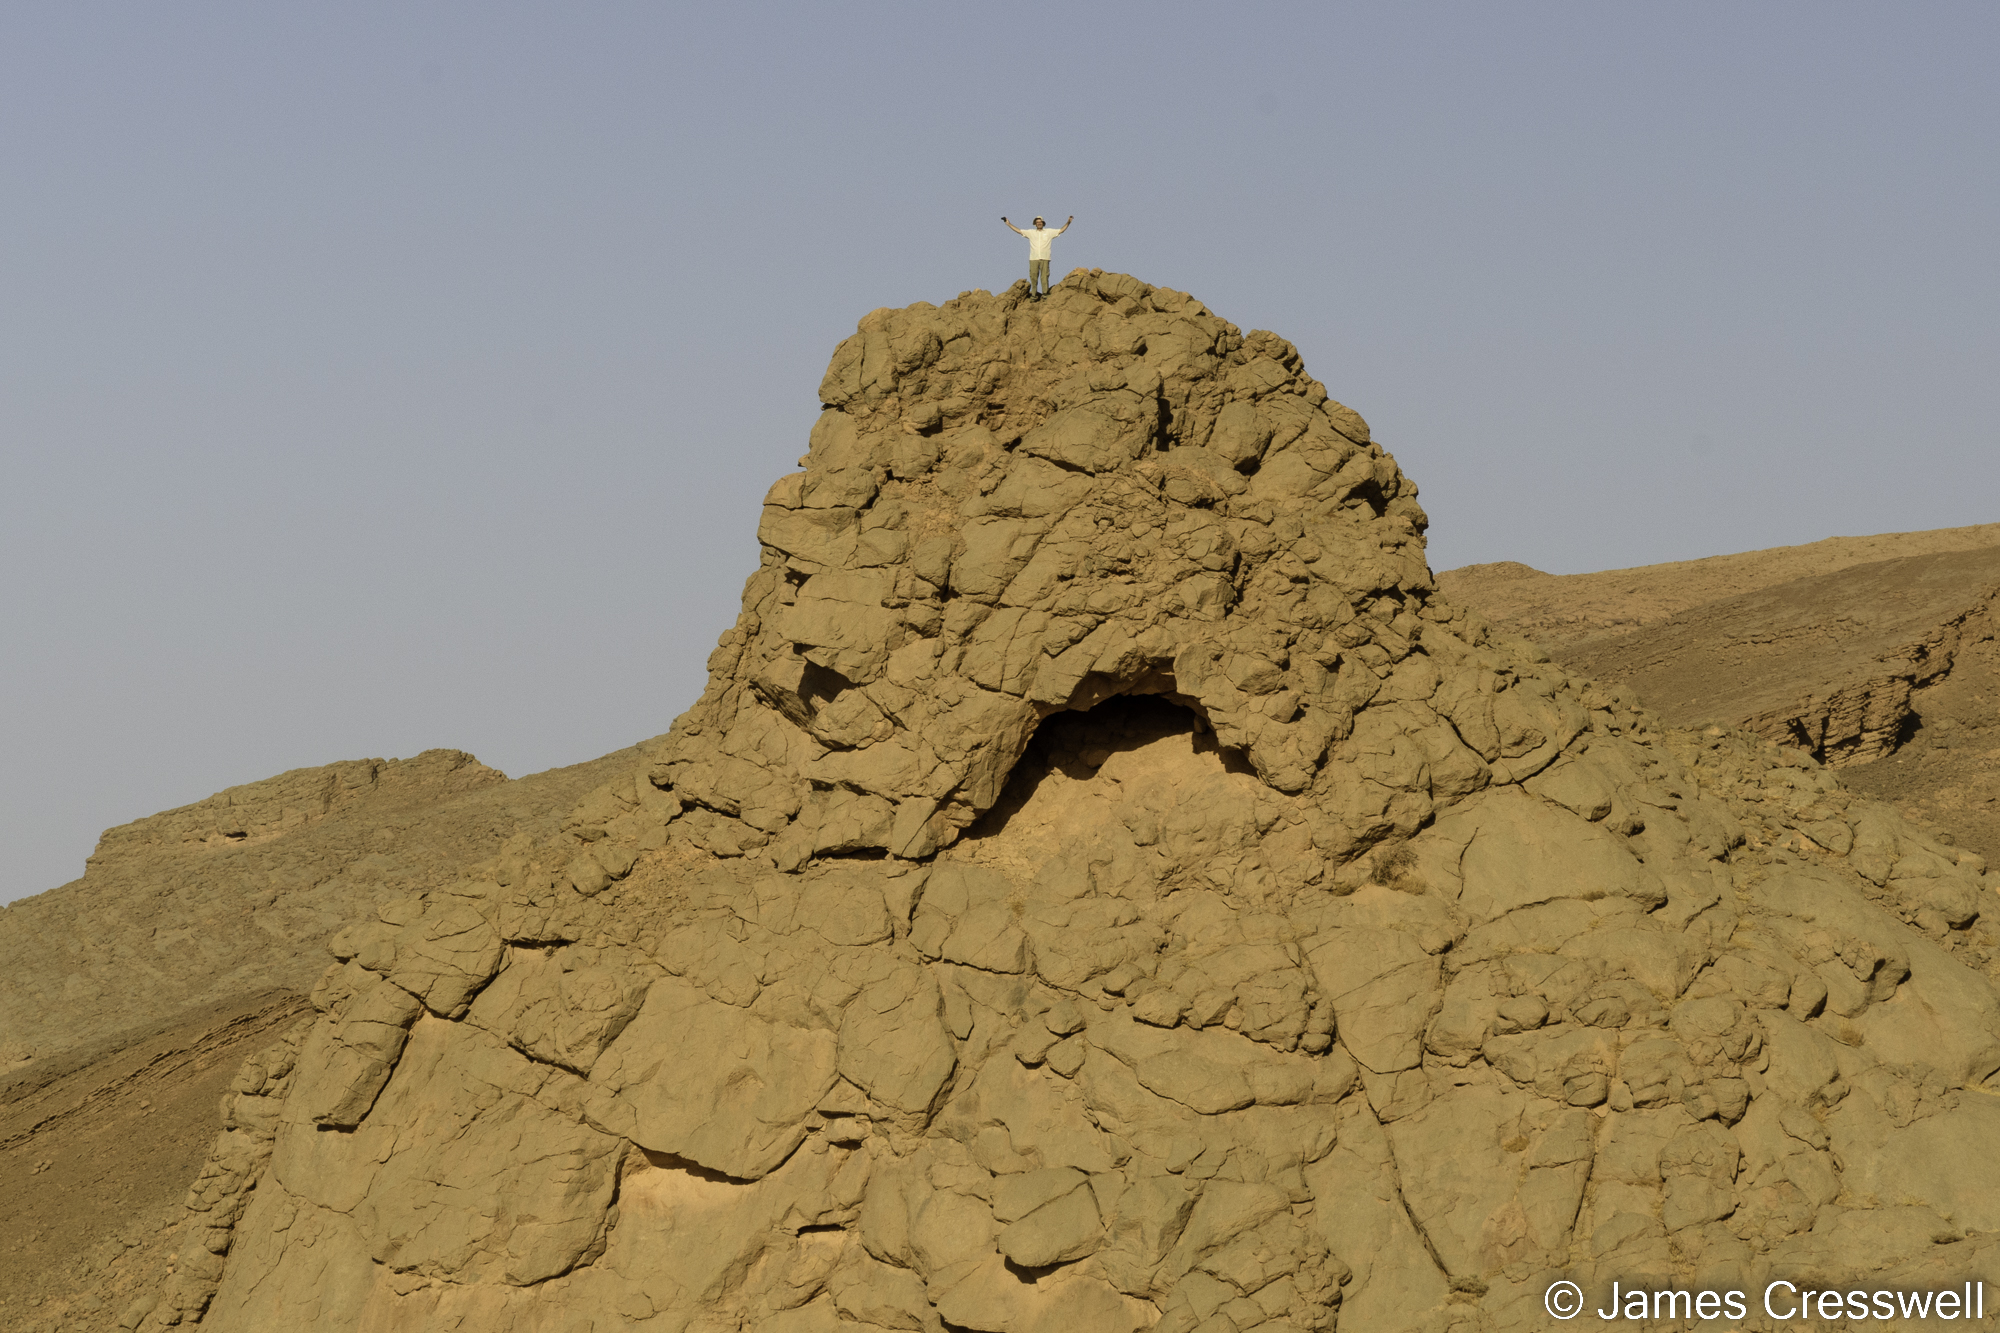 A photograph of a man standing on top of a large rocky outcrop